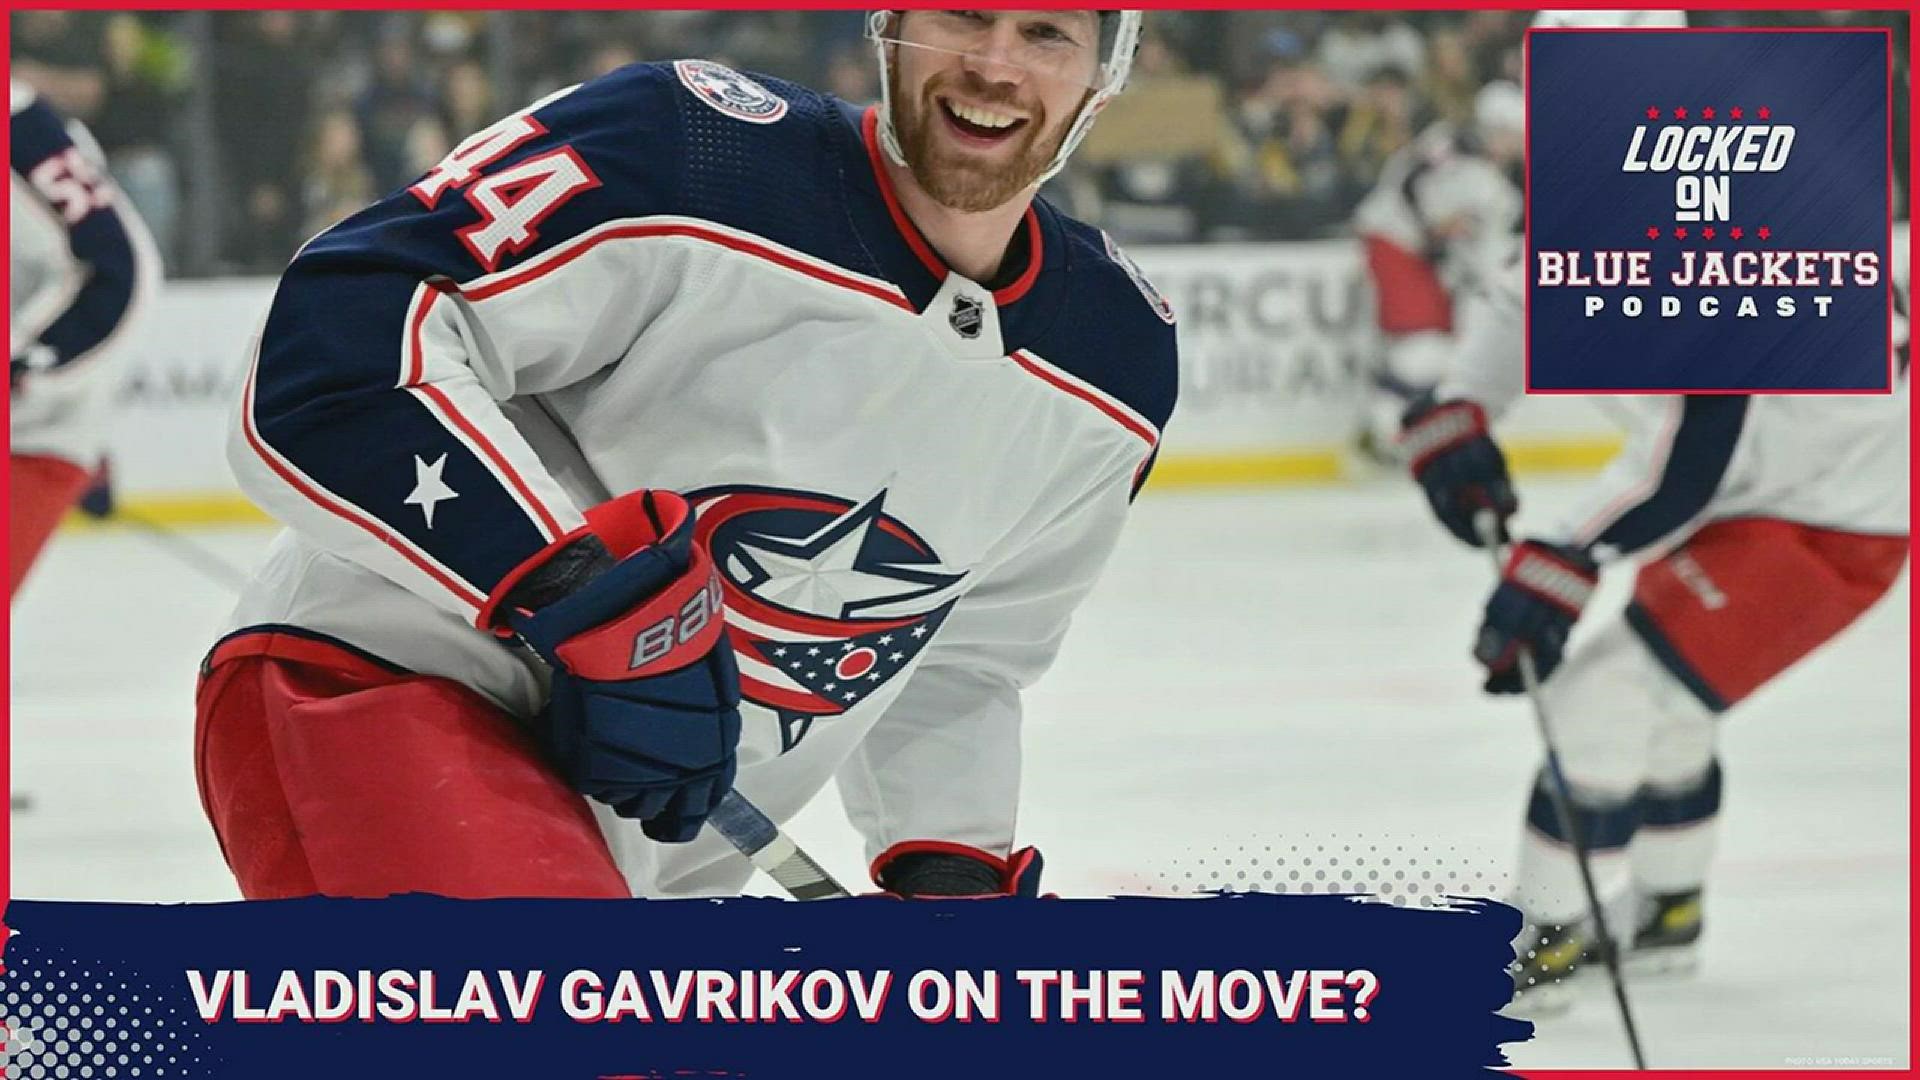 Gavrikov, 27, is a heavy-hitting, minute-munching defenseman who is drawing a lot of interest around the NHL Trade Deadline.